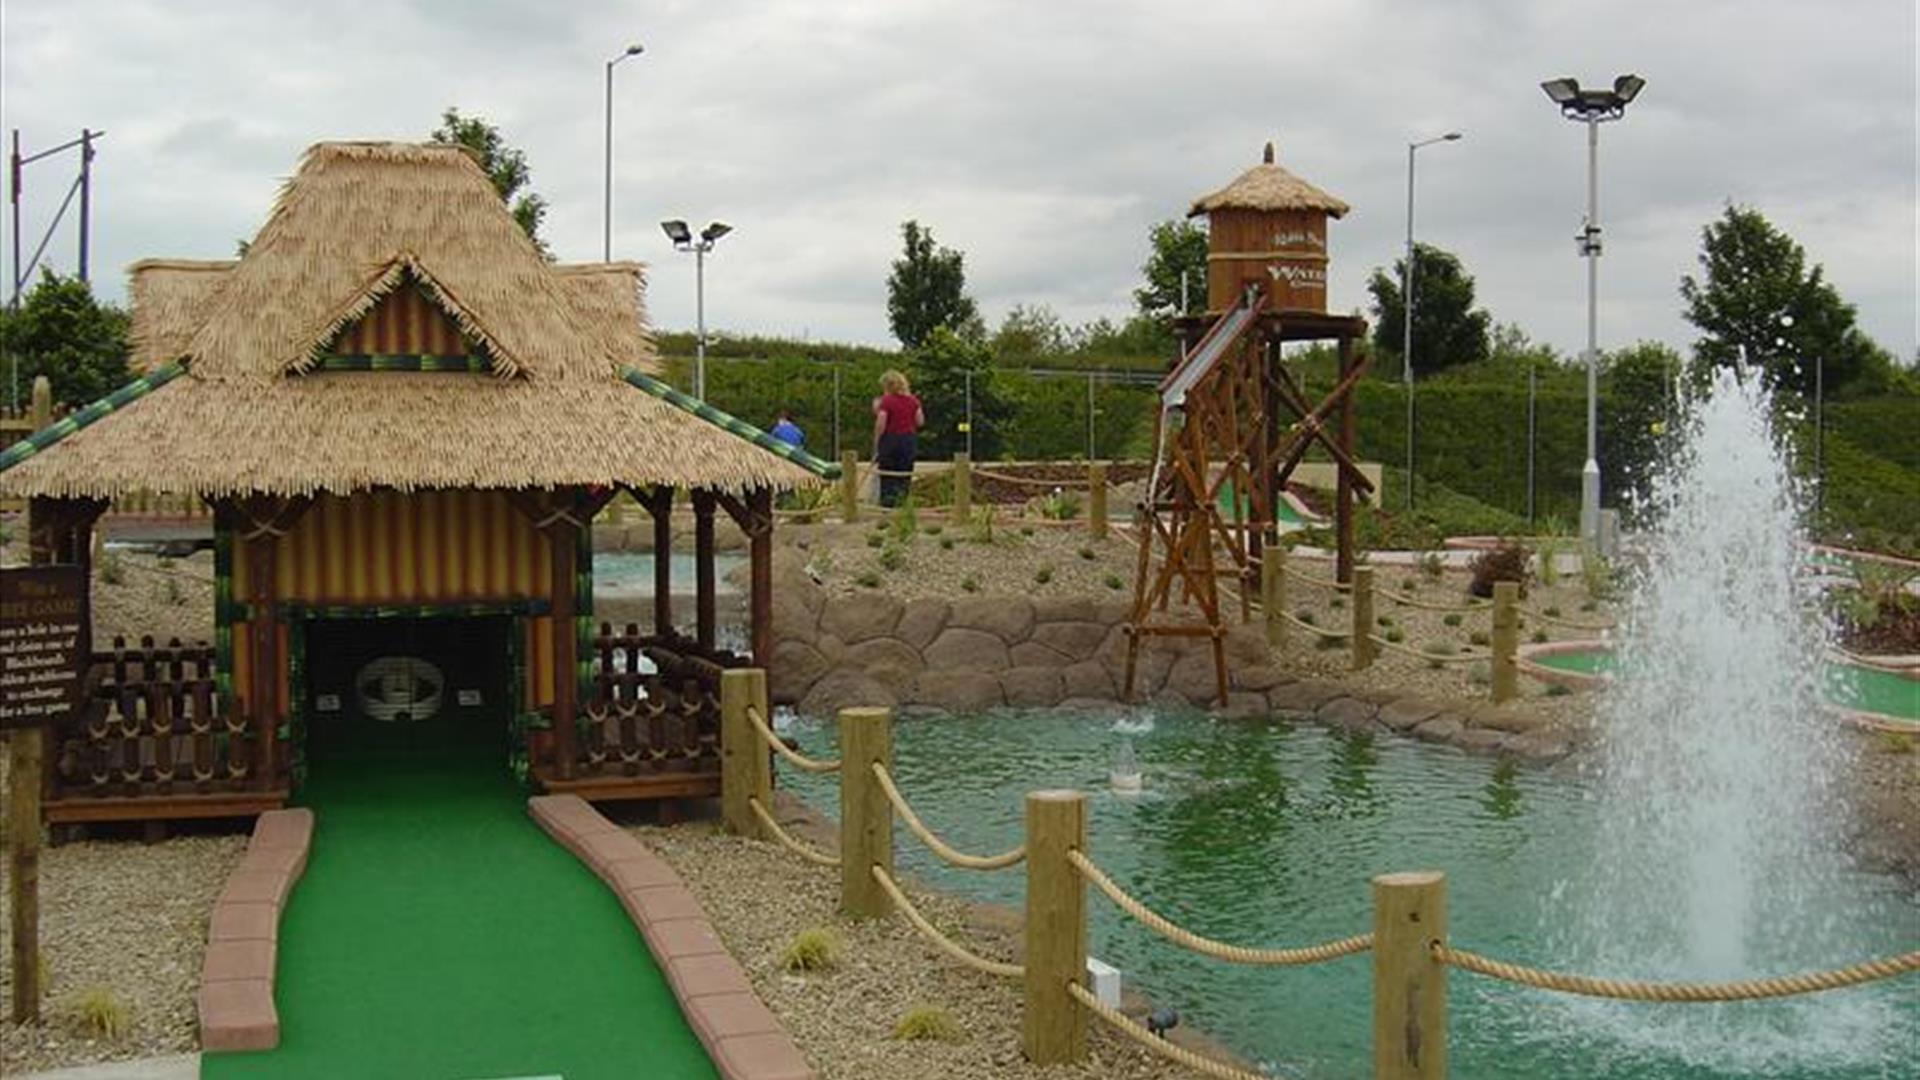 Image shows golf putting area with small lake and fountain